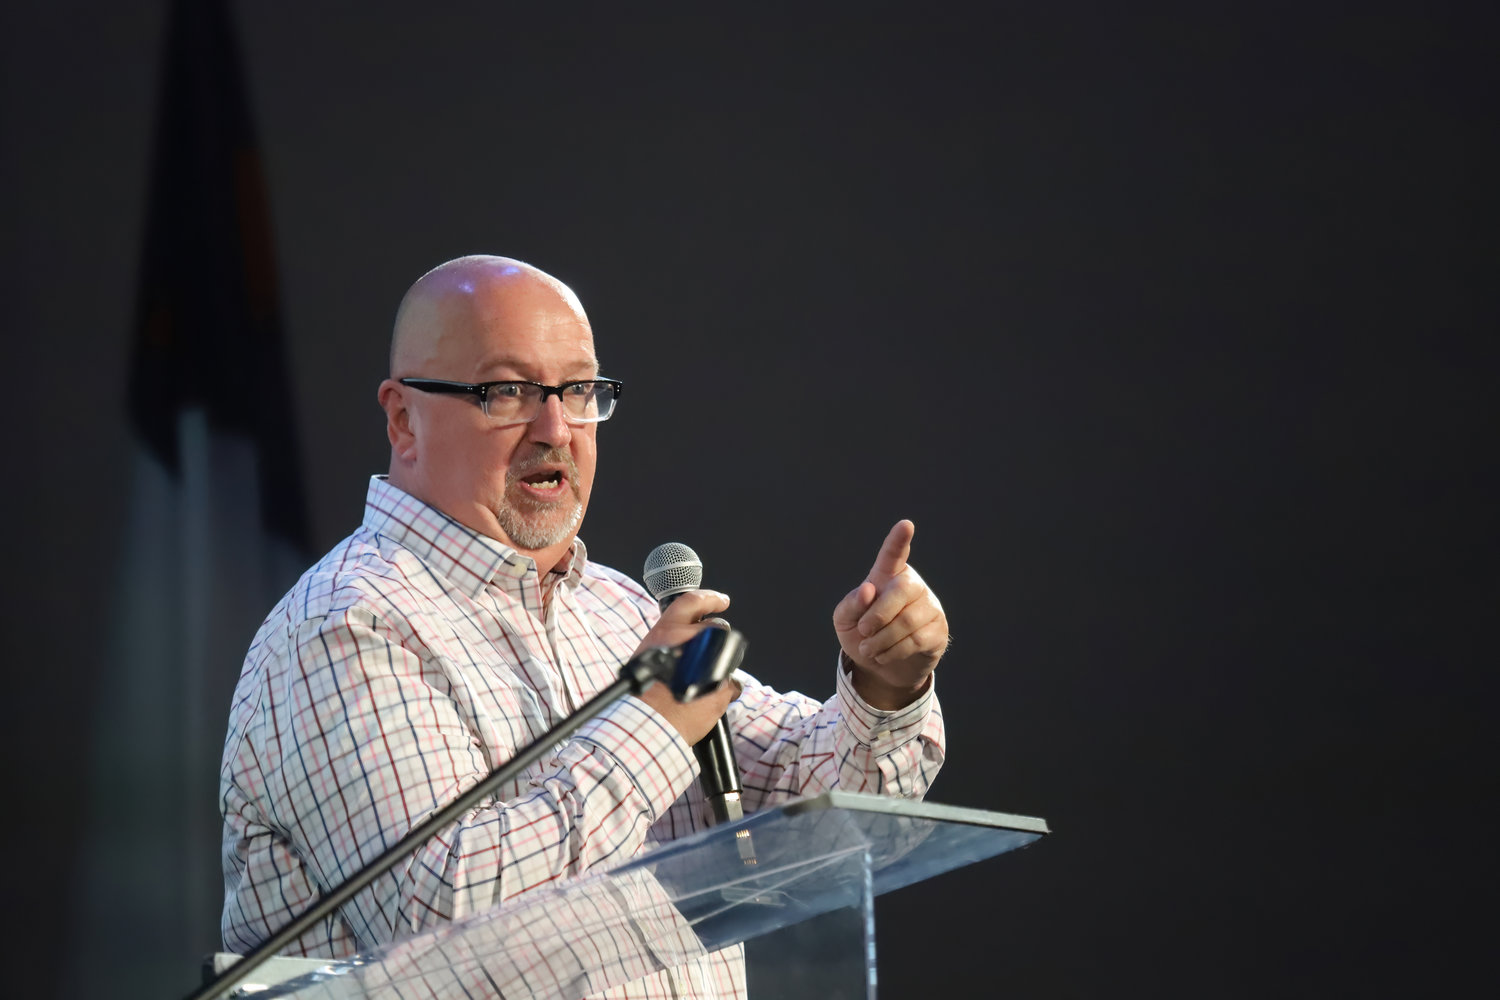 Pastor Walt Hatch encouraged churches to participate in the Association-led VBS training during the San Diego Southern Baptist Association 80th Anniversary on Saturday January 14, 2023, El Cajon, CA